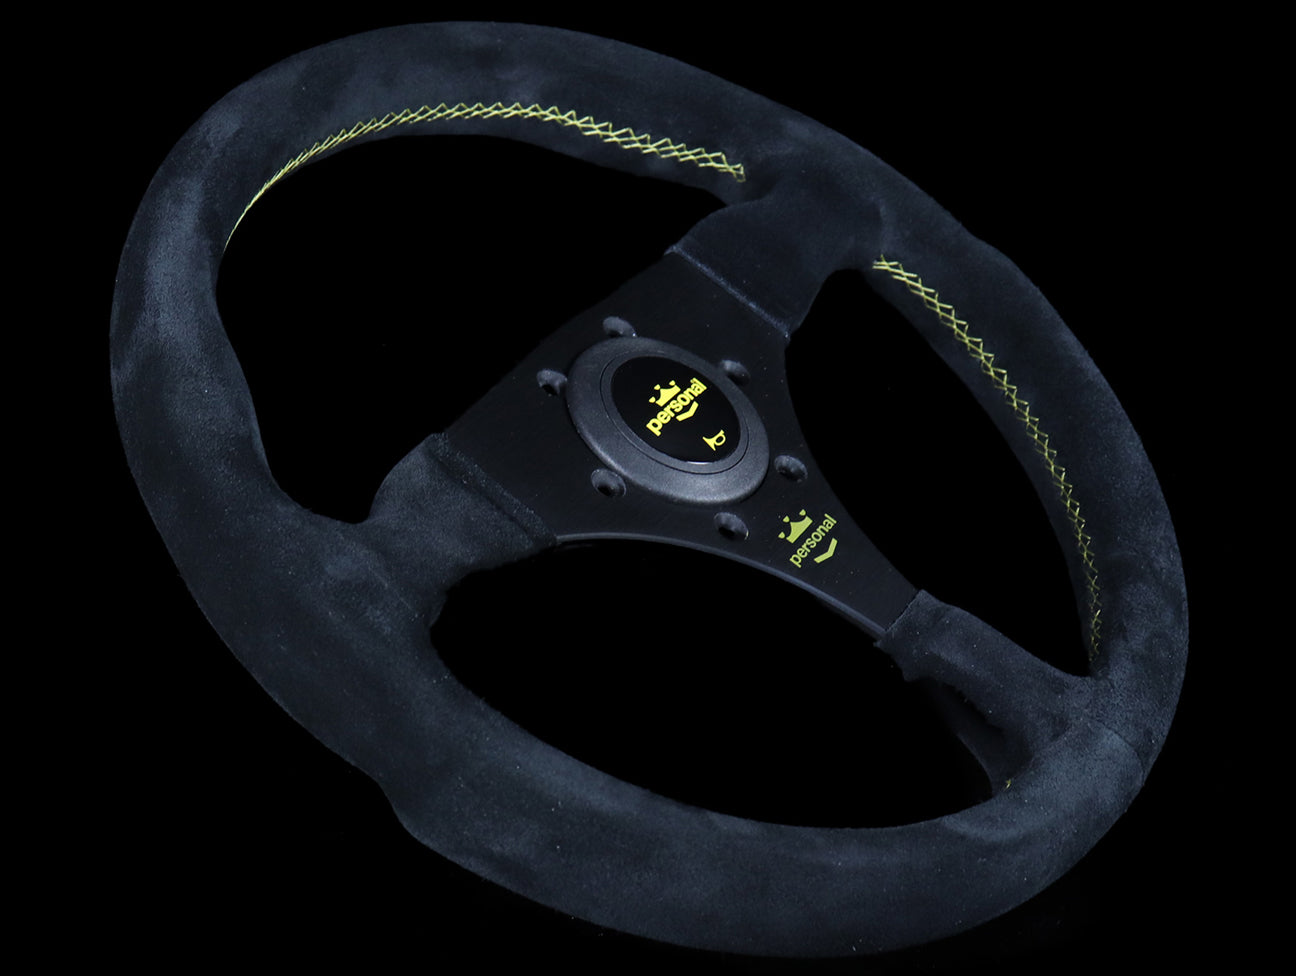 Personal Fitti F1 320mm Steering Wheel - Black Suede / Yellow Stitch